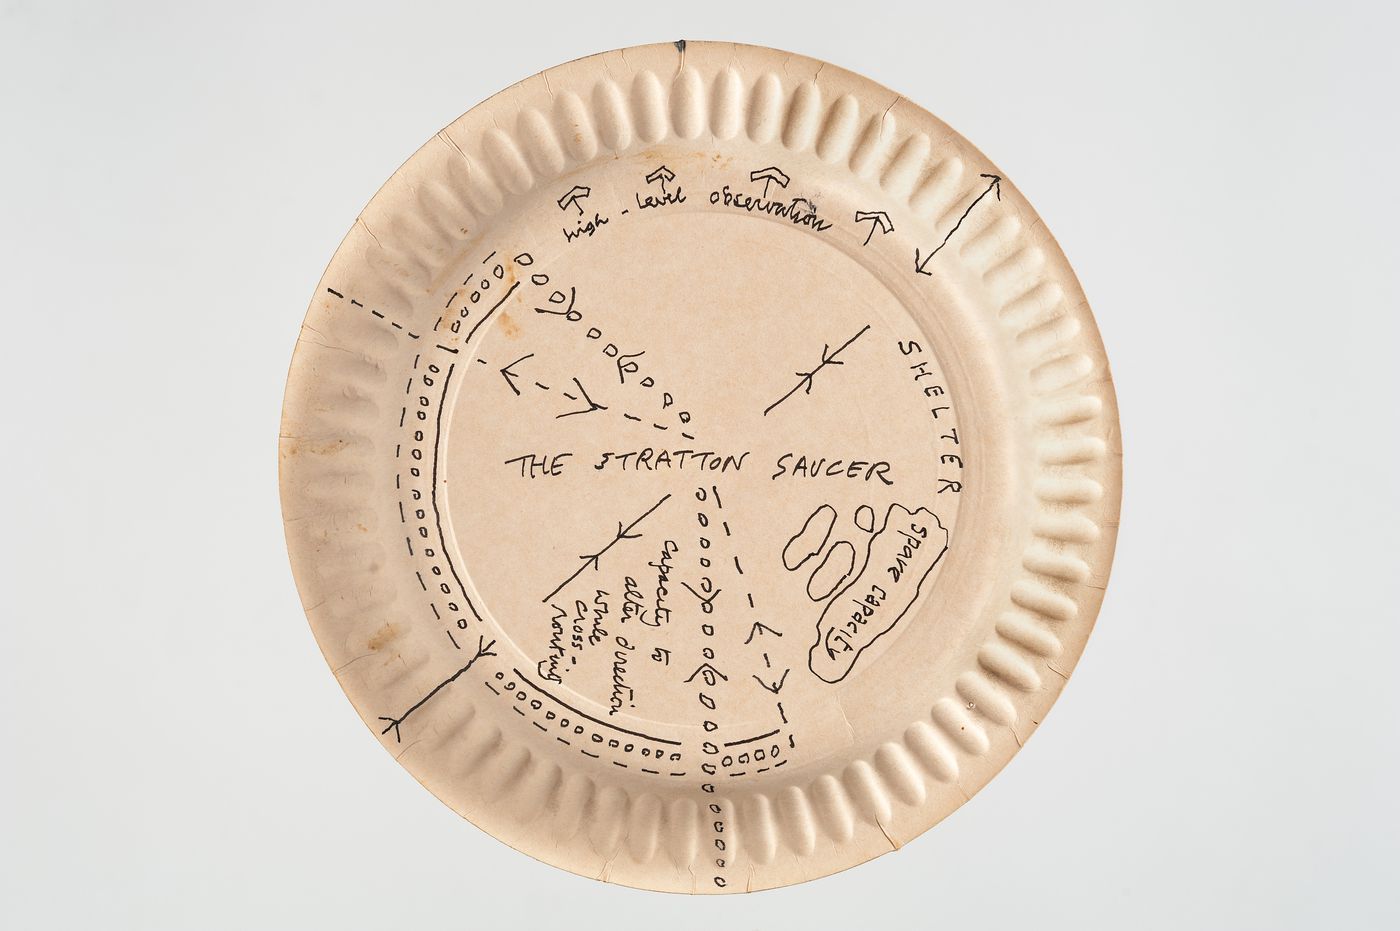 Stratton: preliminary sketch for "The Stratton Saucer" on underside of paper plate